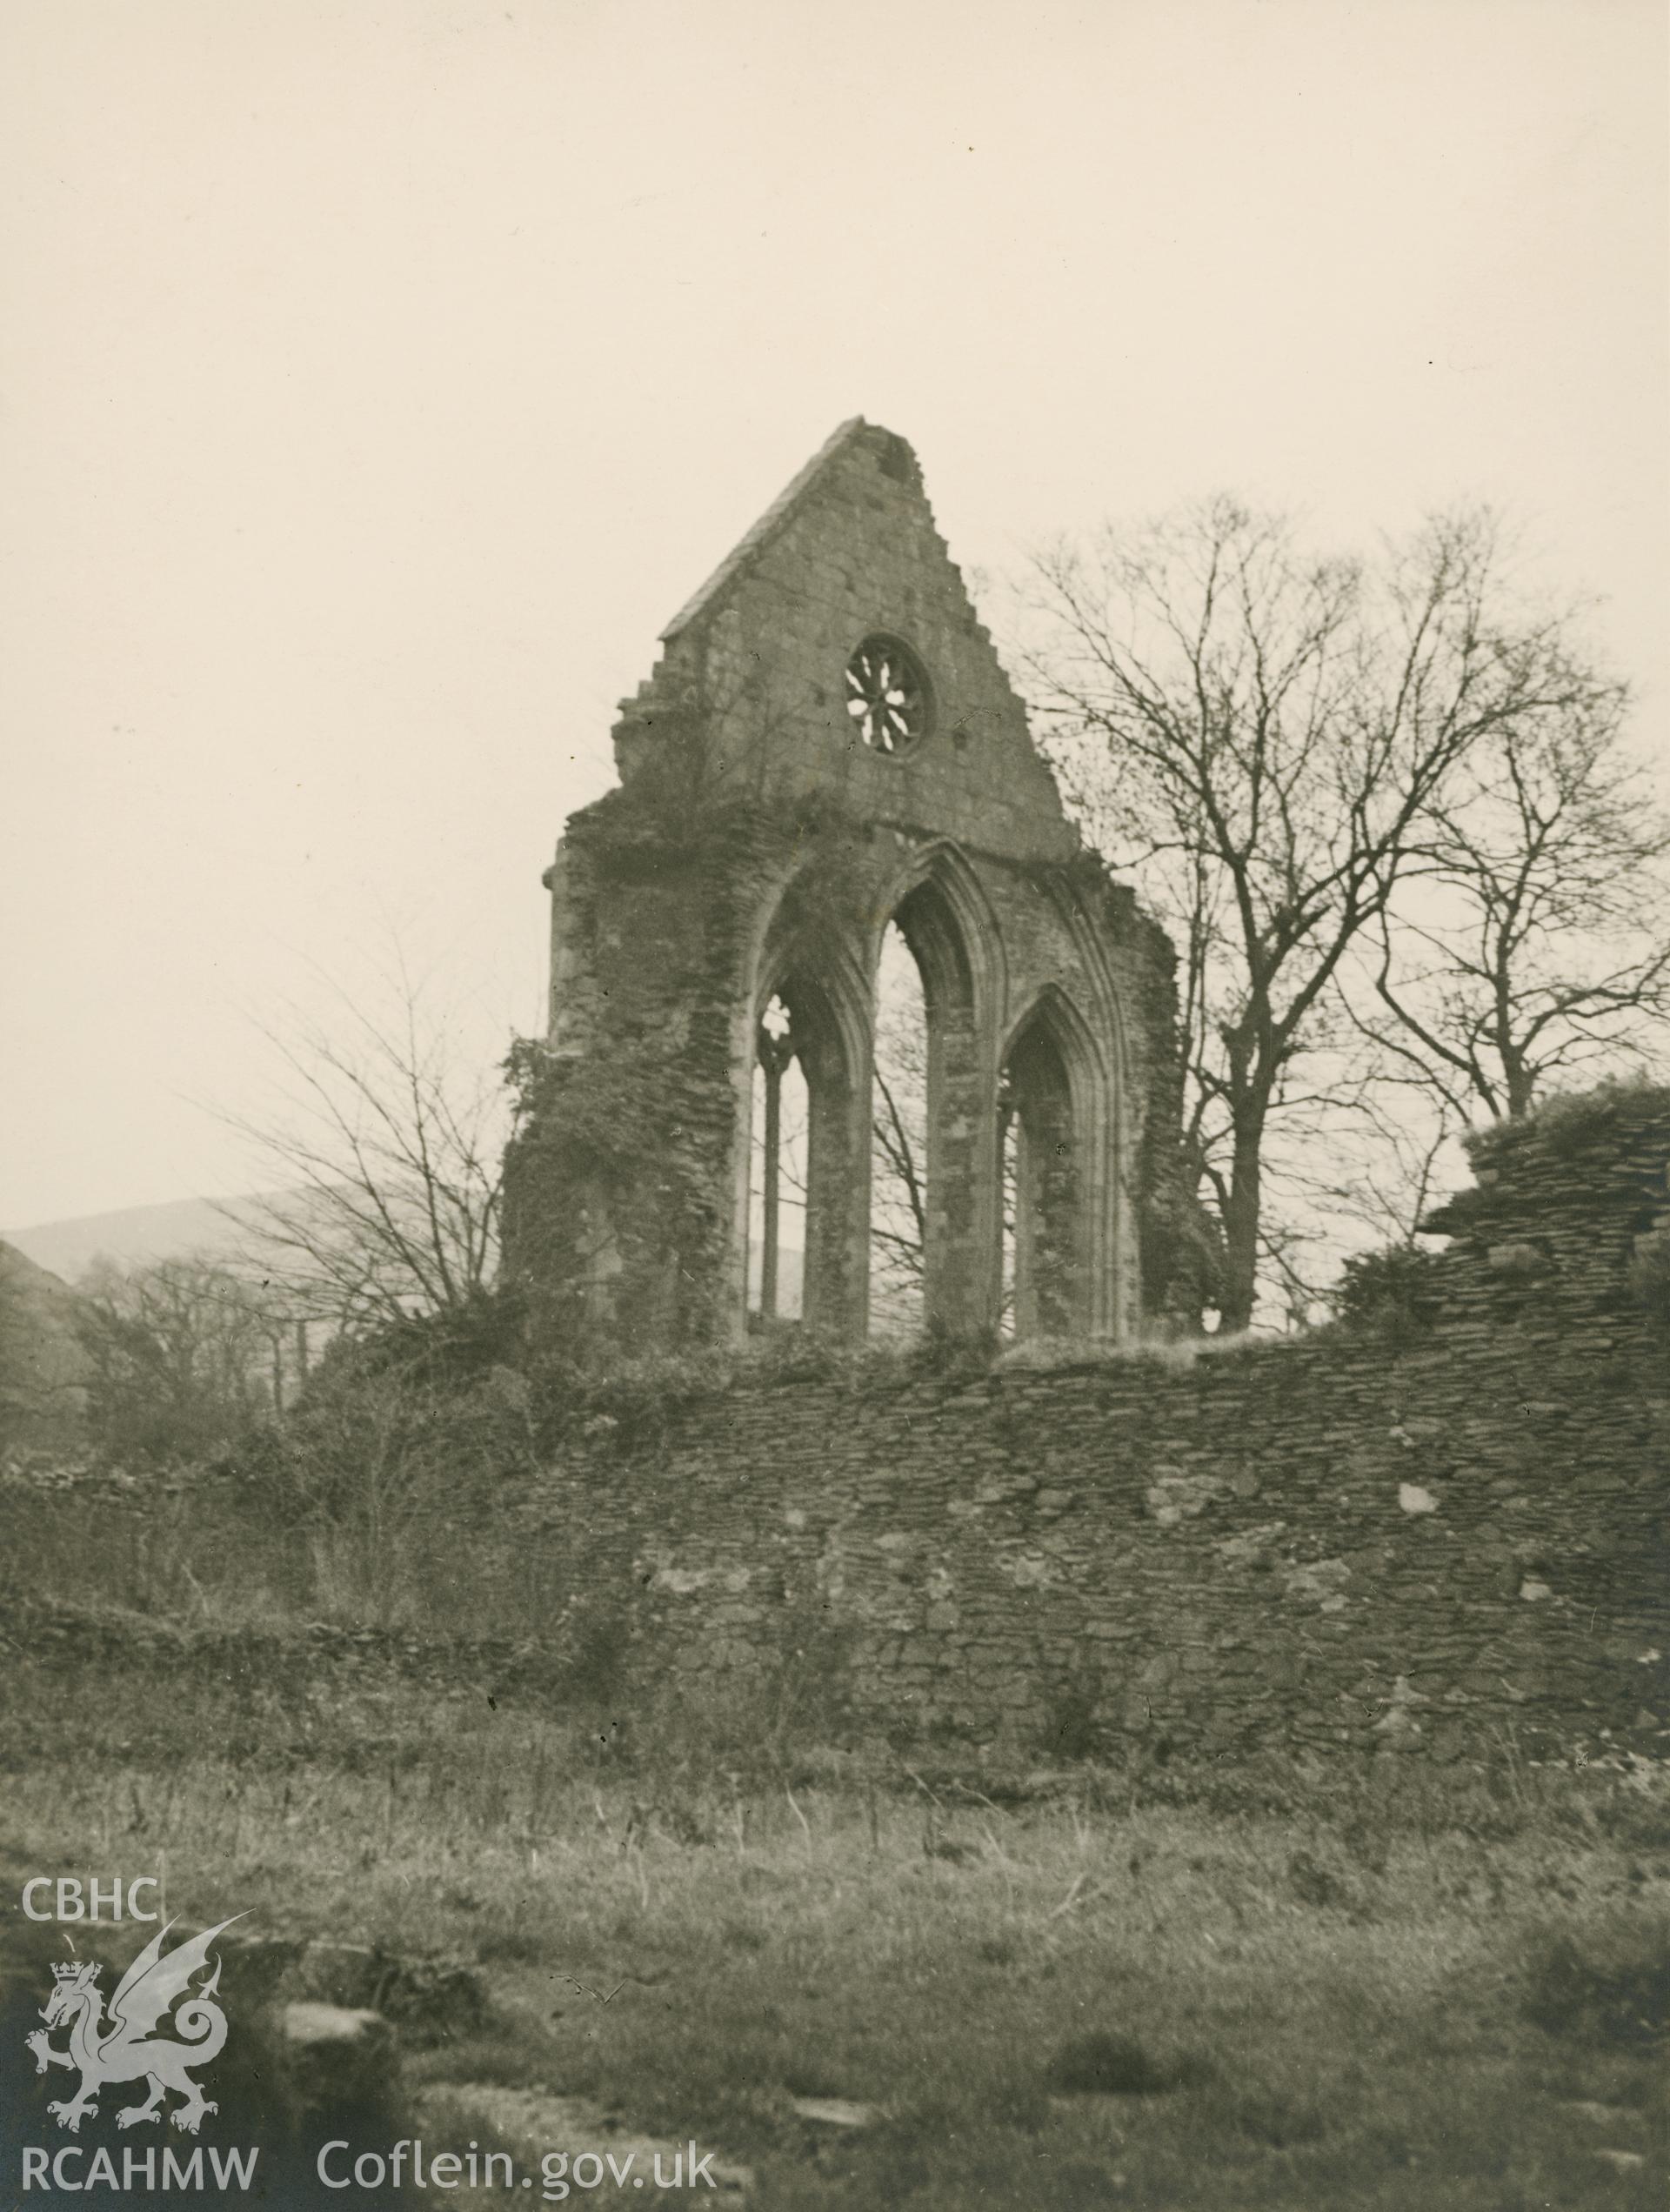 Digitised copy of an exterior view of Valle Crucis, dated 1940.